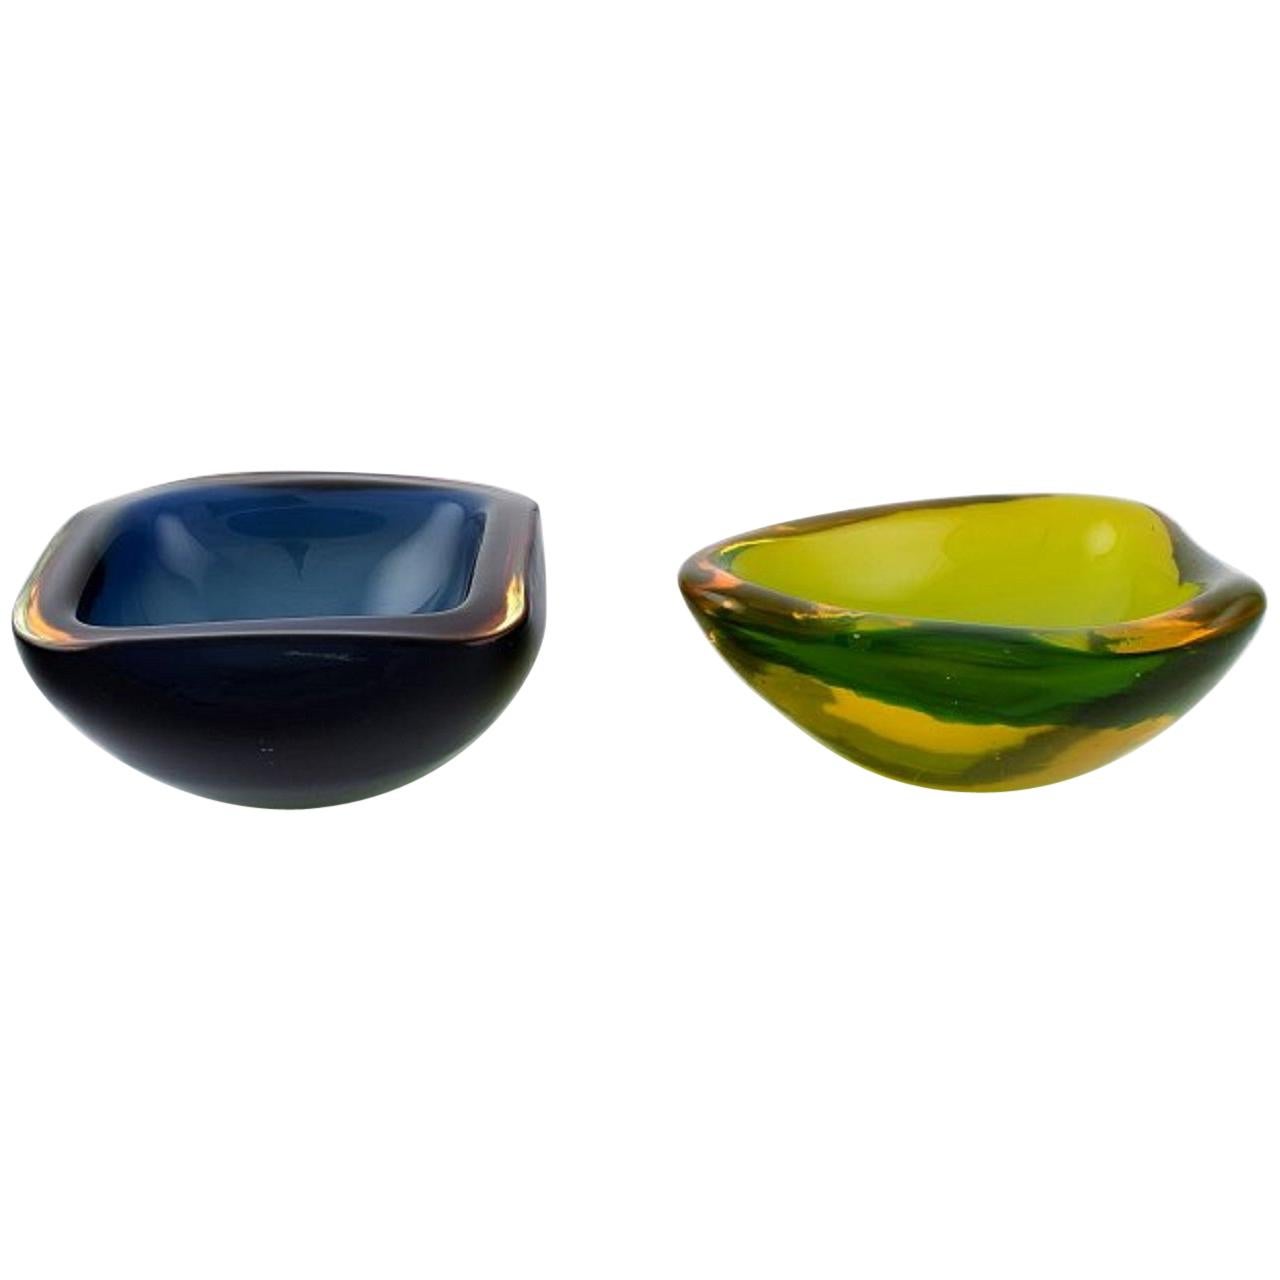 Two Murano Bowls in Blue and Green-Yellow Mouth-Blown Art Glass, Italian Design